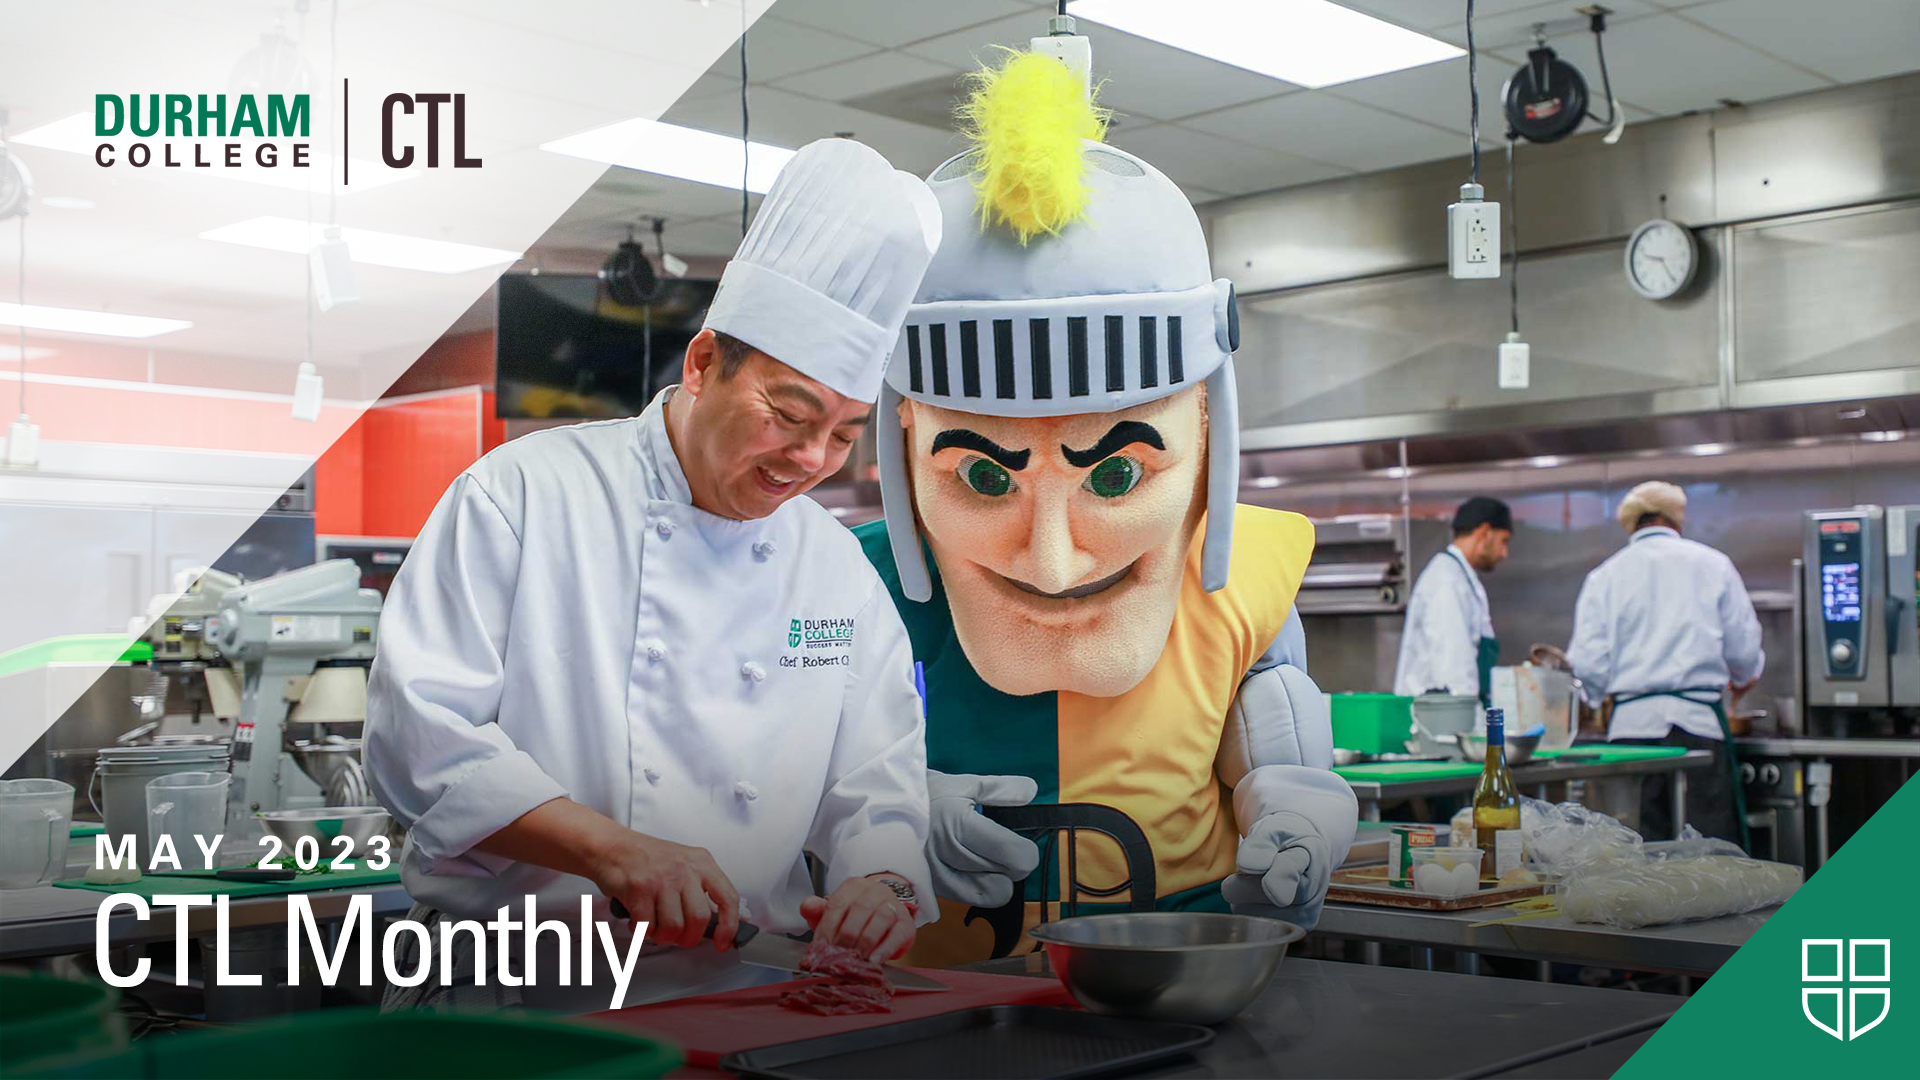 A cook chops up meat on a cutting board with a knife. The Durham College Durham mascot - Lord Durham - watches to his left